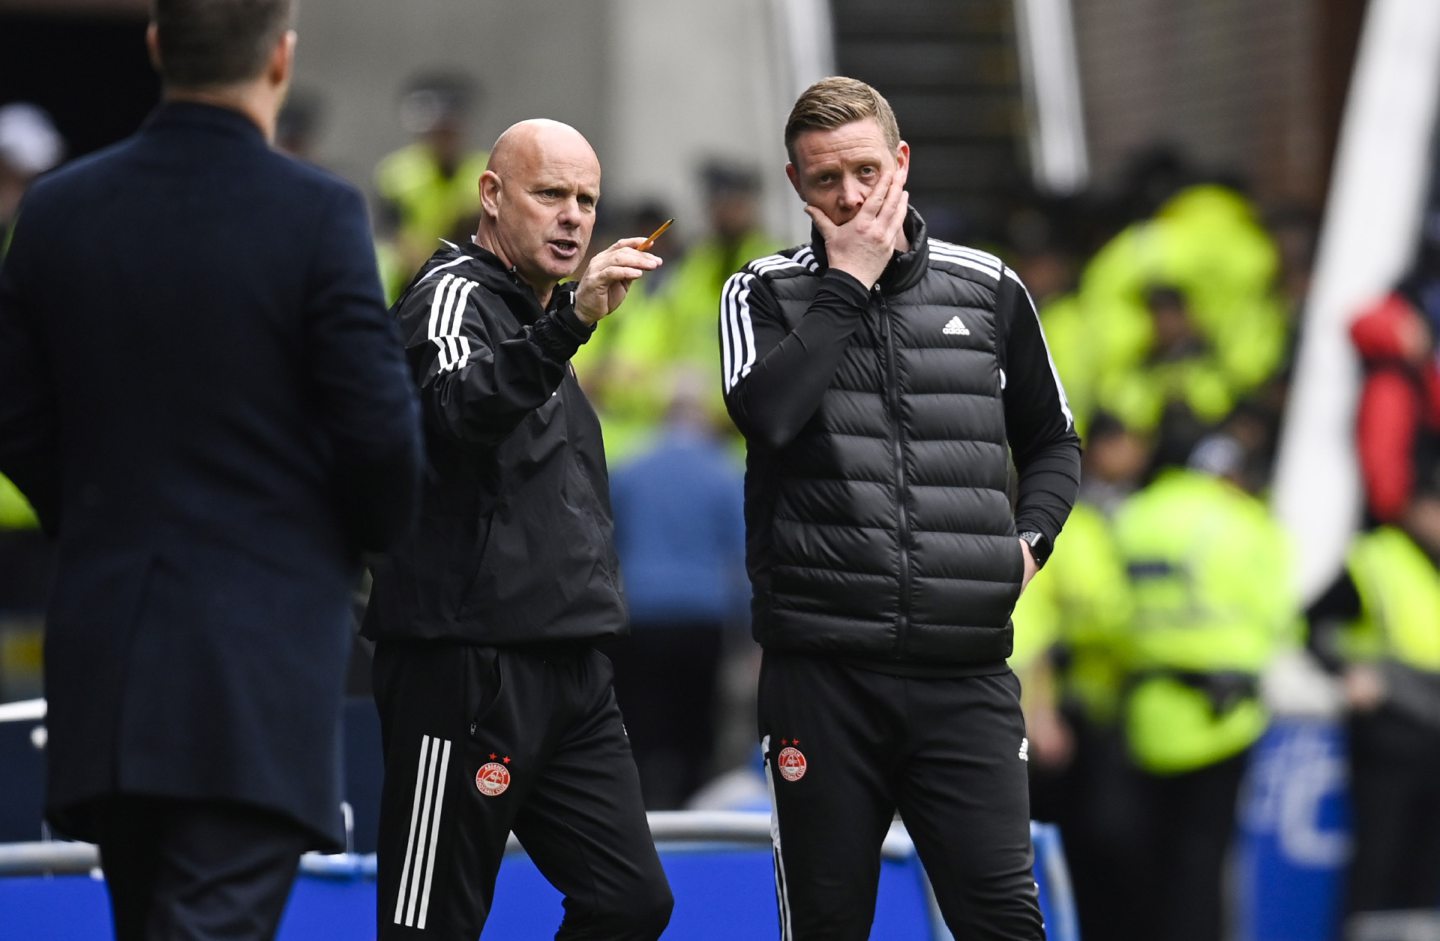 Aberdeen manager Barry Robson and assistant Steve Agnew at Ibrox